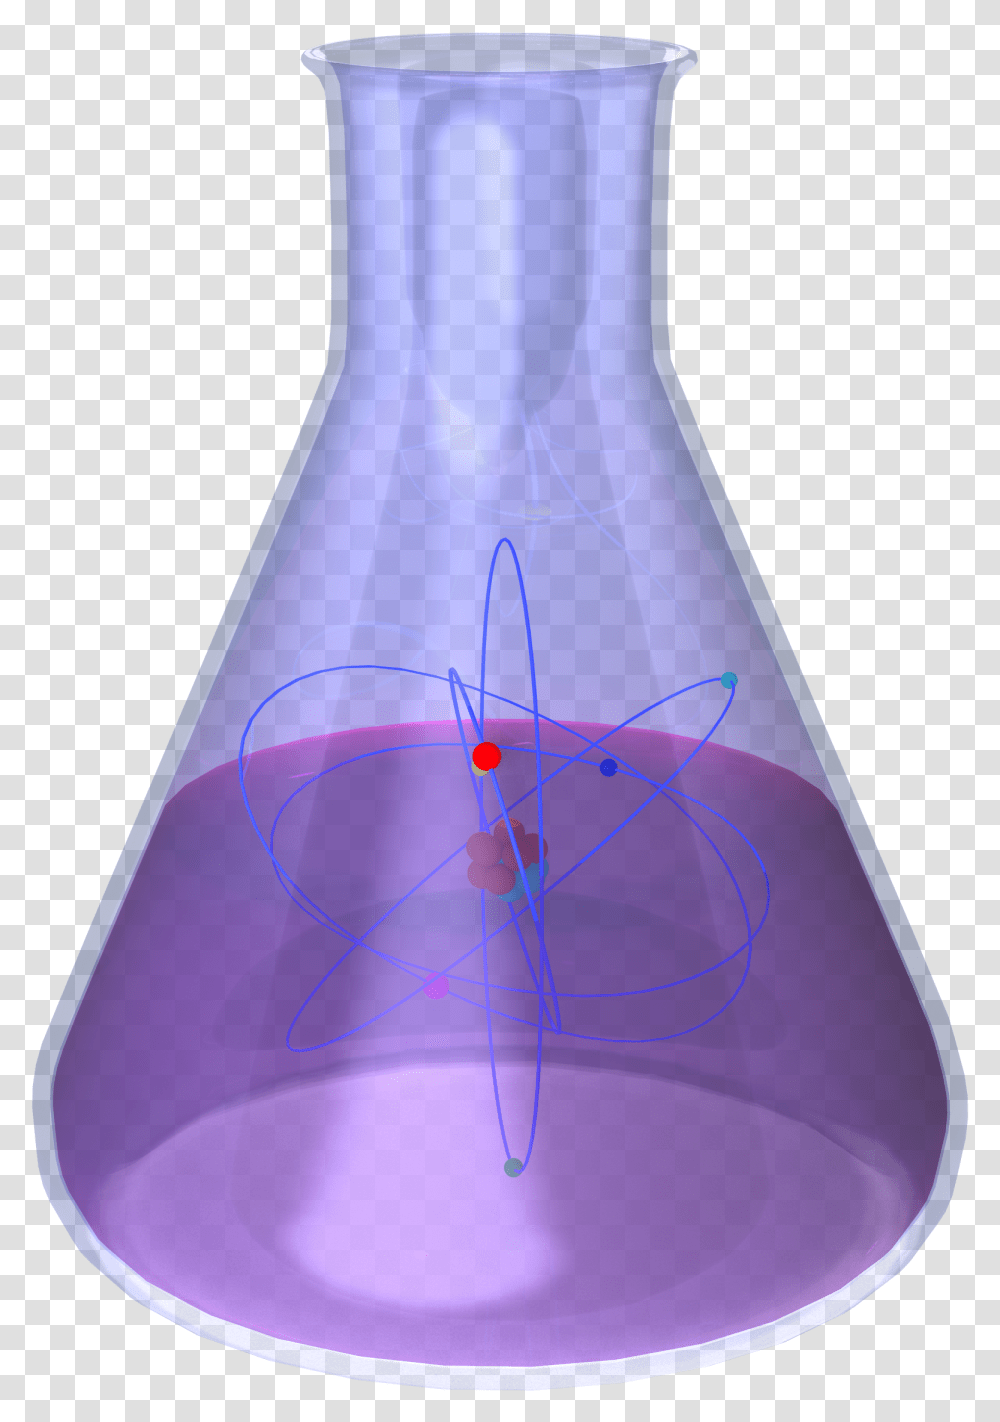 Erlenmeyer Atom Lab Free Photo, Apparel, Cone Transparent Png